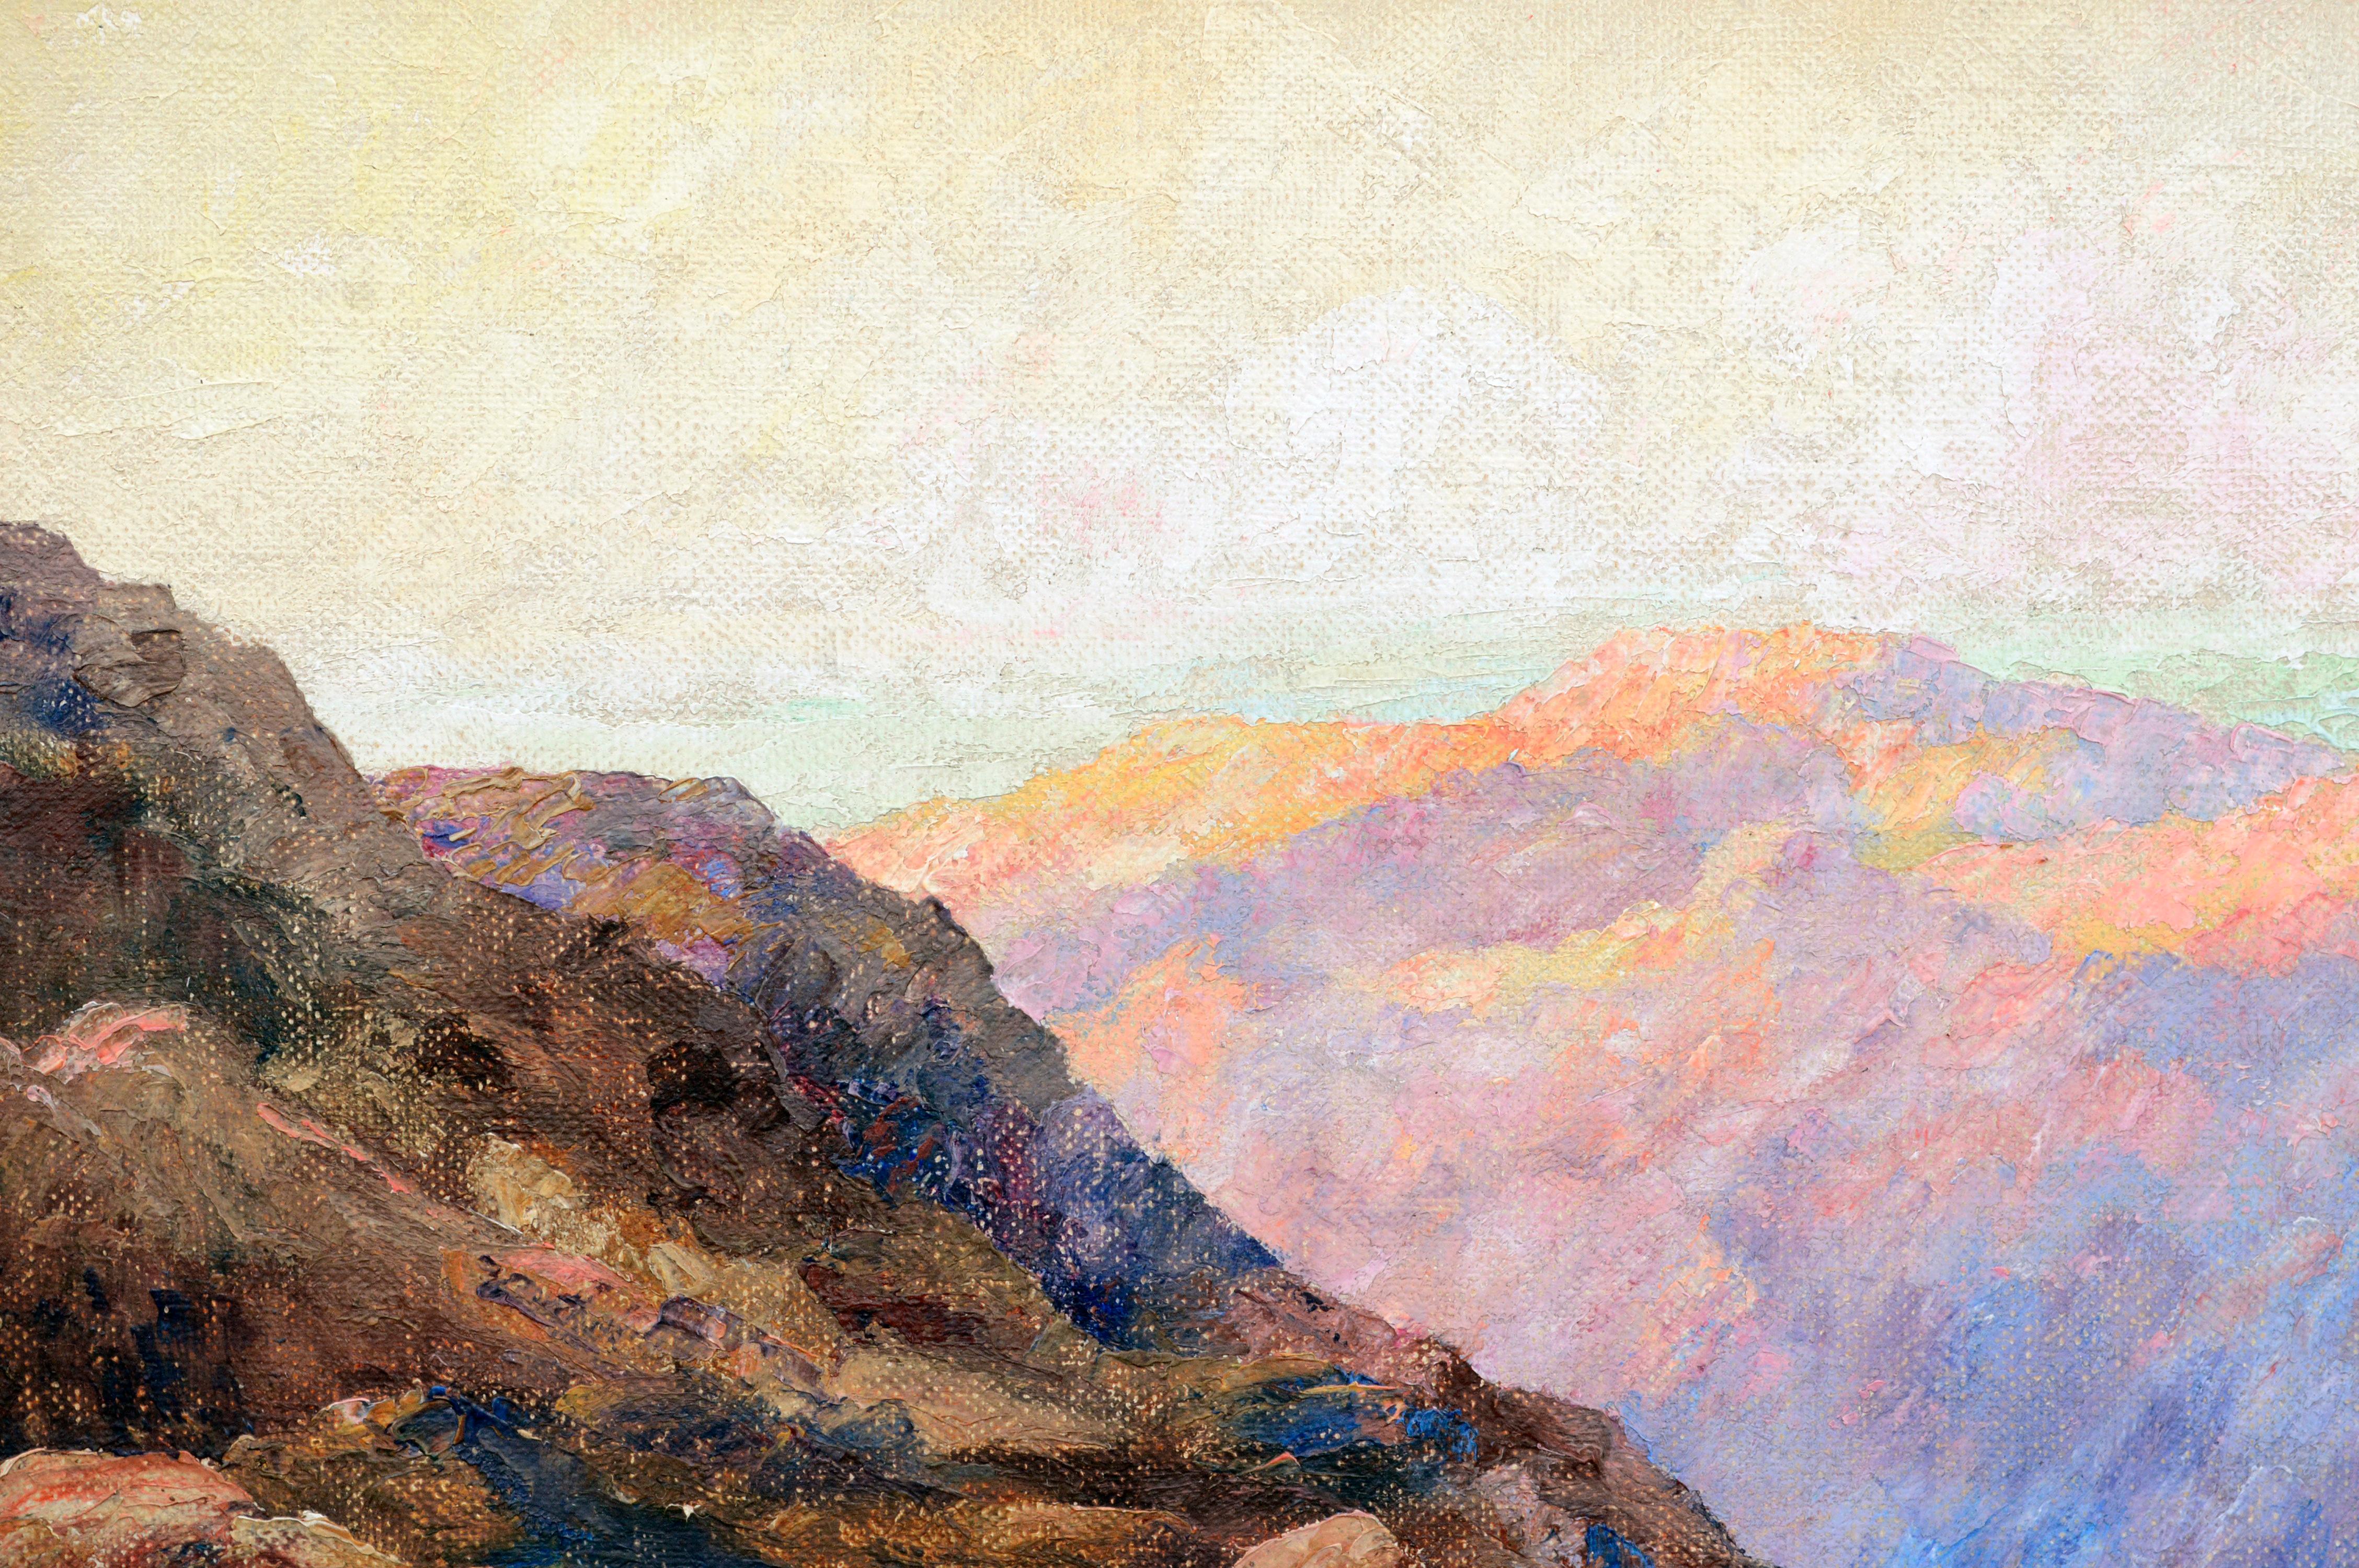 Early 20th Century Distant Canyon Landscape  - American Impressionist Painting by Cyrus Bates Currier